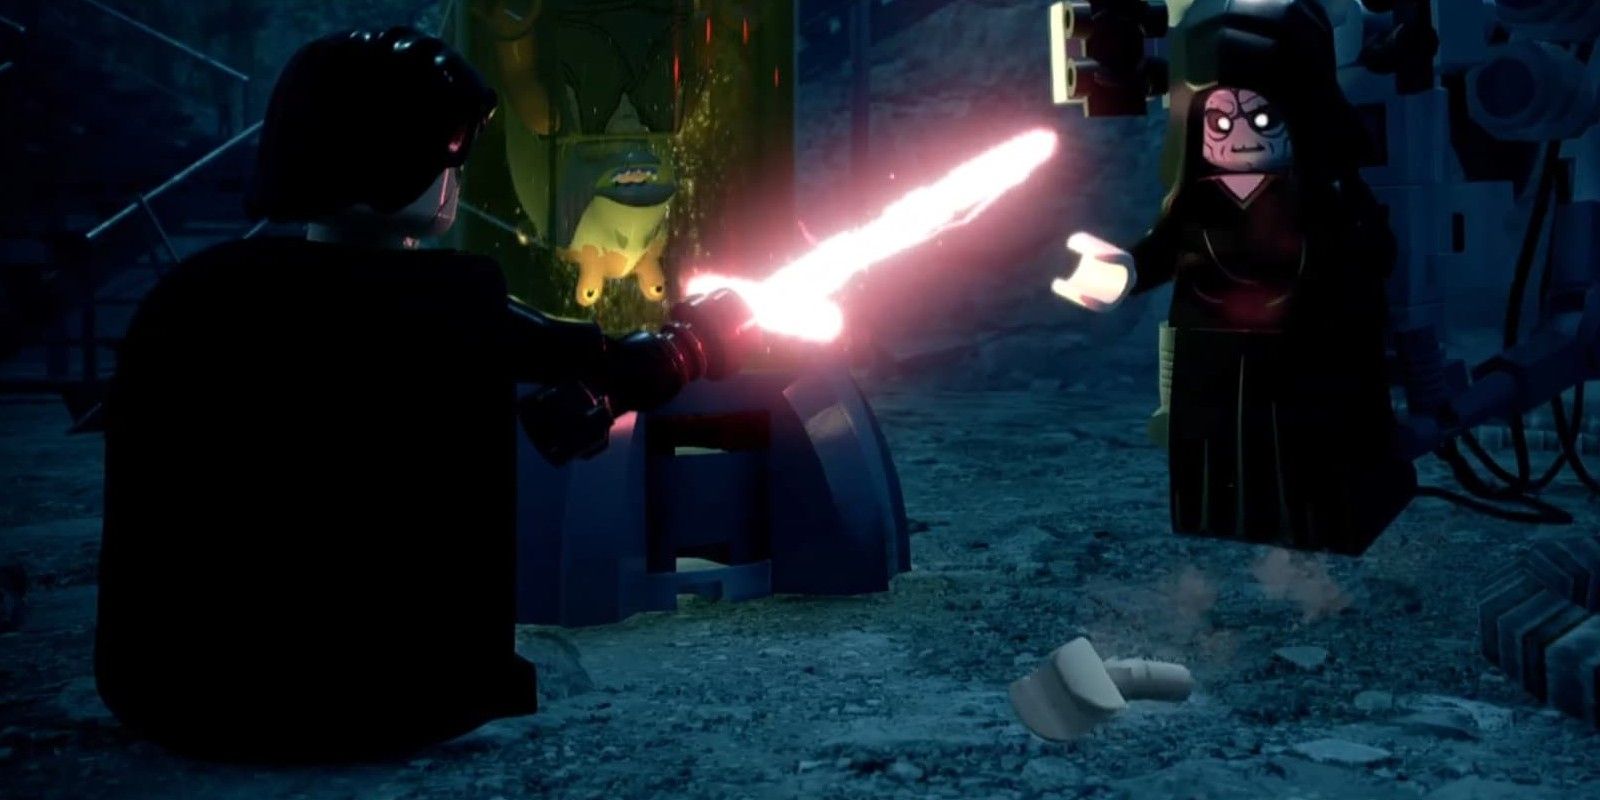 Jar Jar on Exegol in LEGO Star Wars may prove he's a Sith lord.